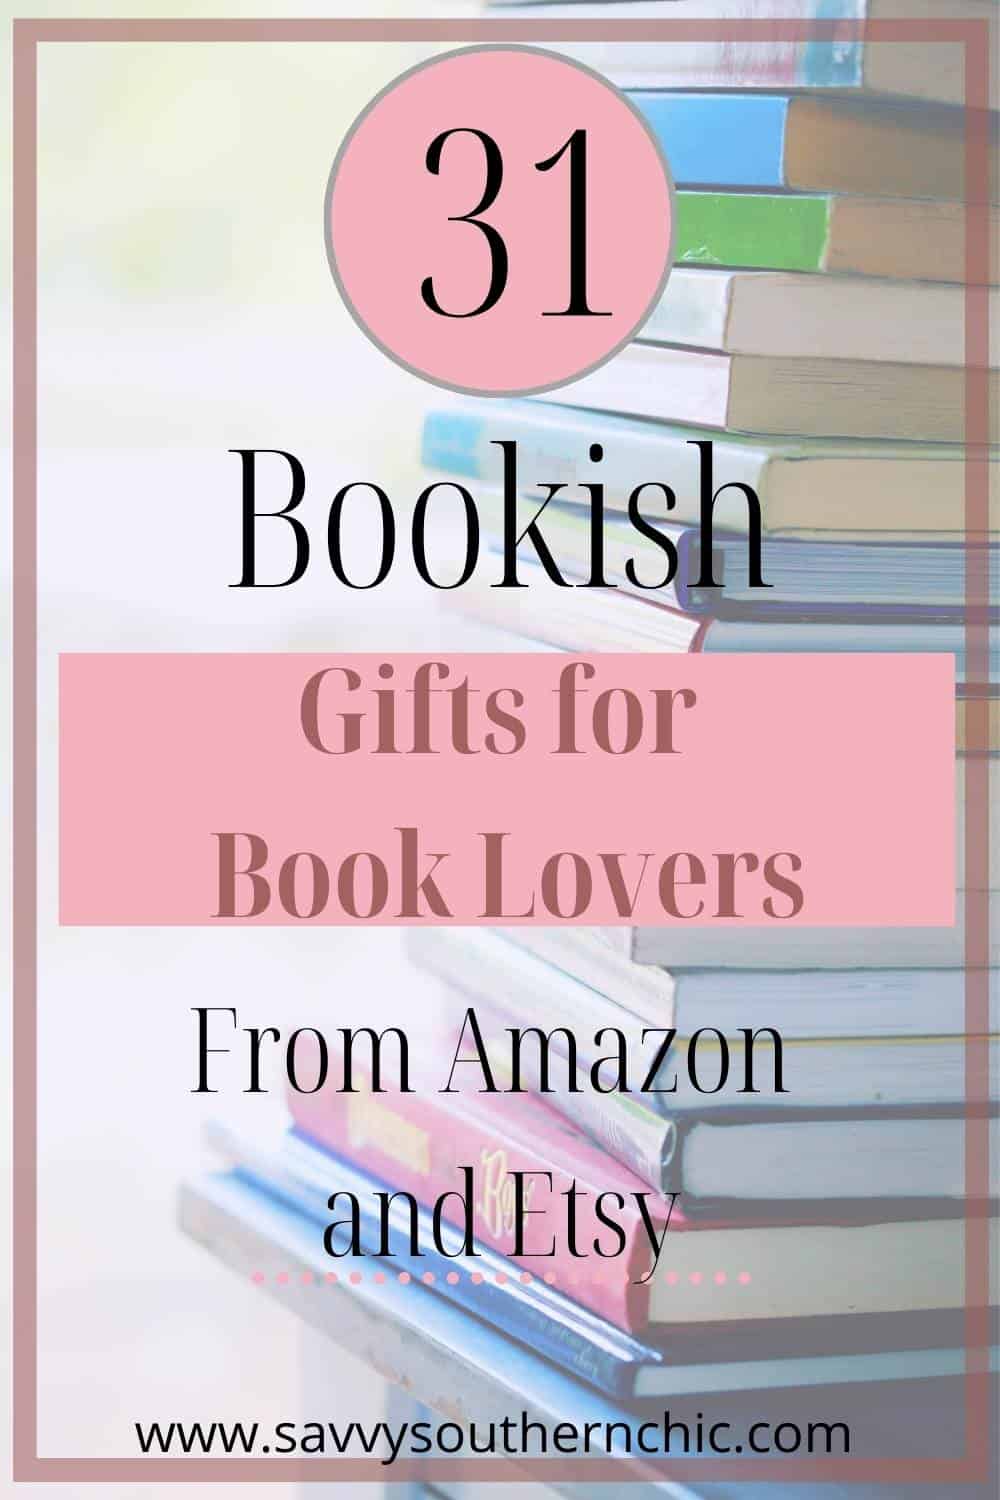 Bookish gifts for book lovers gift guide